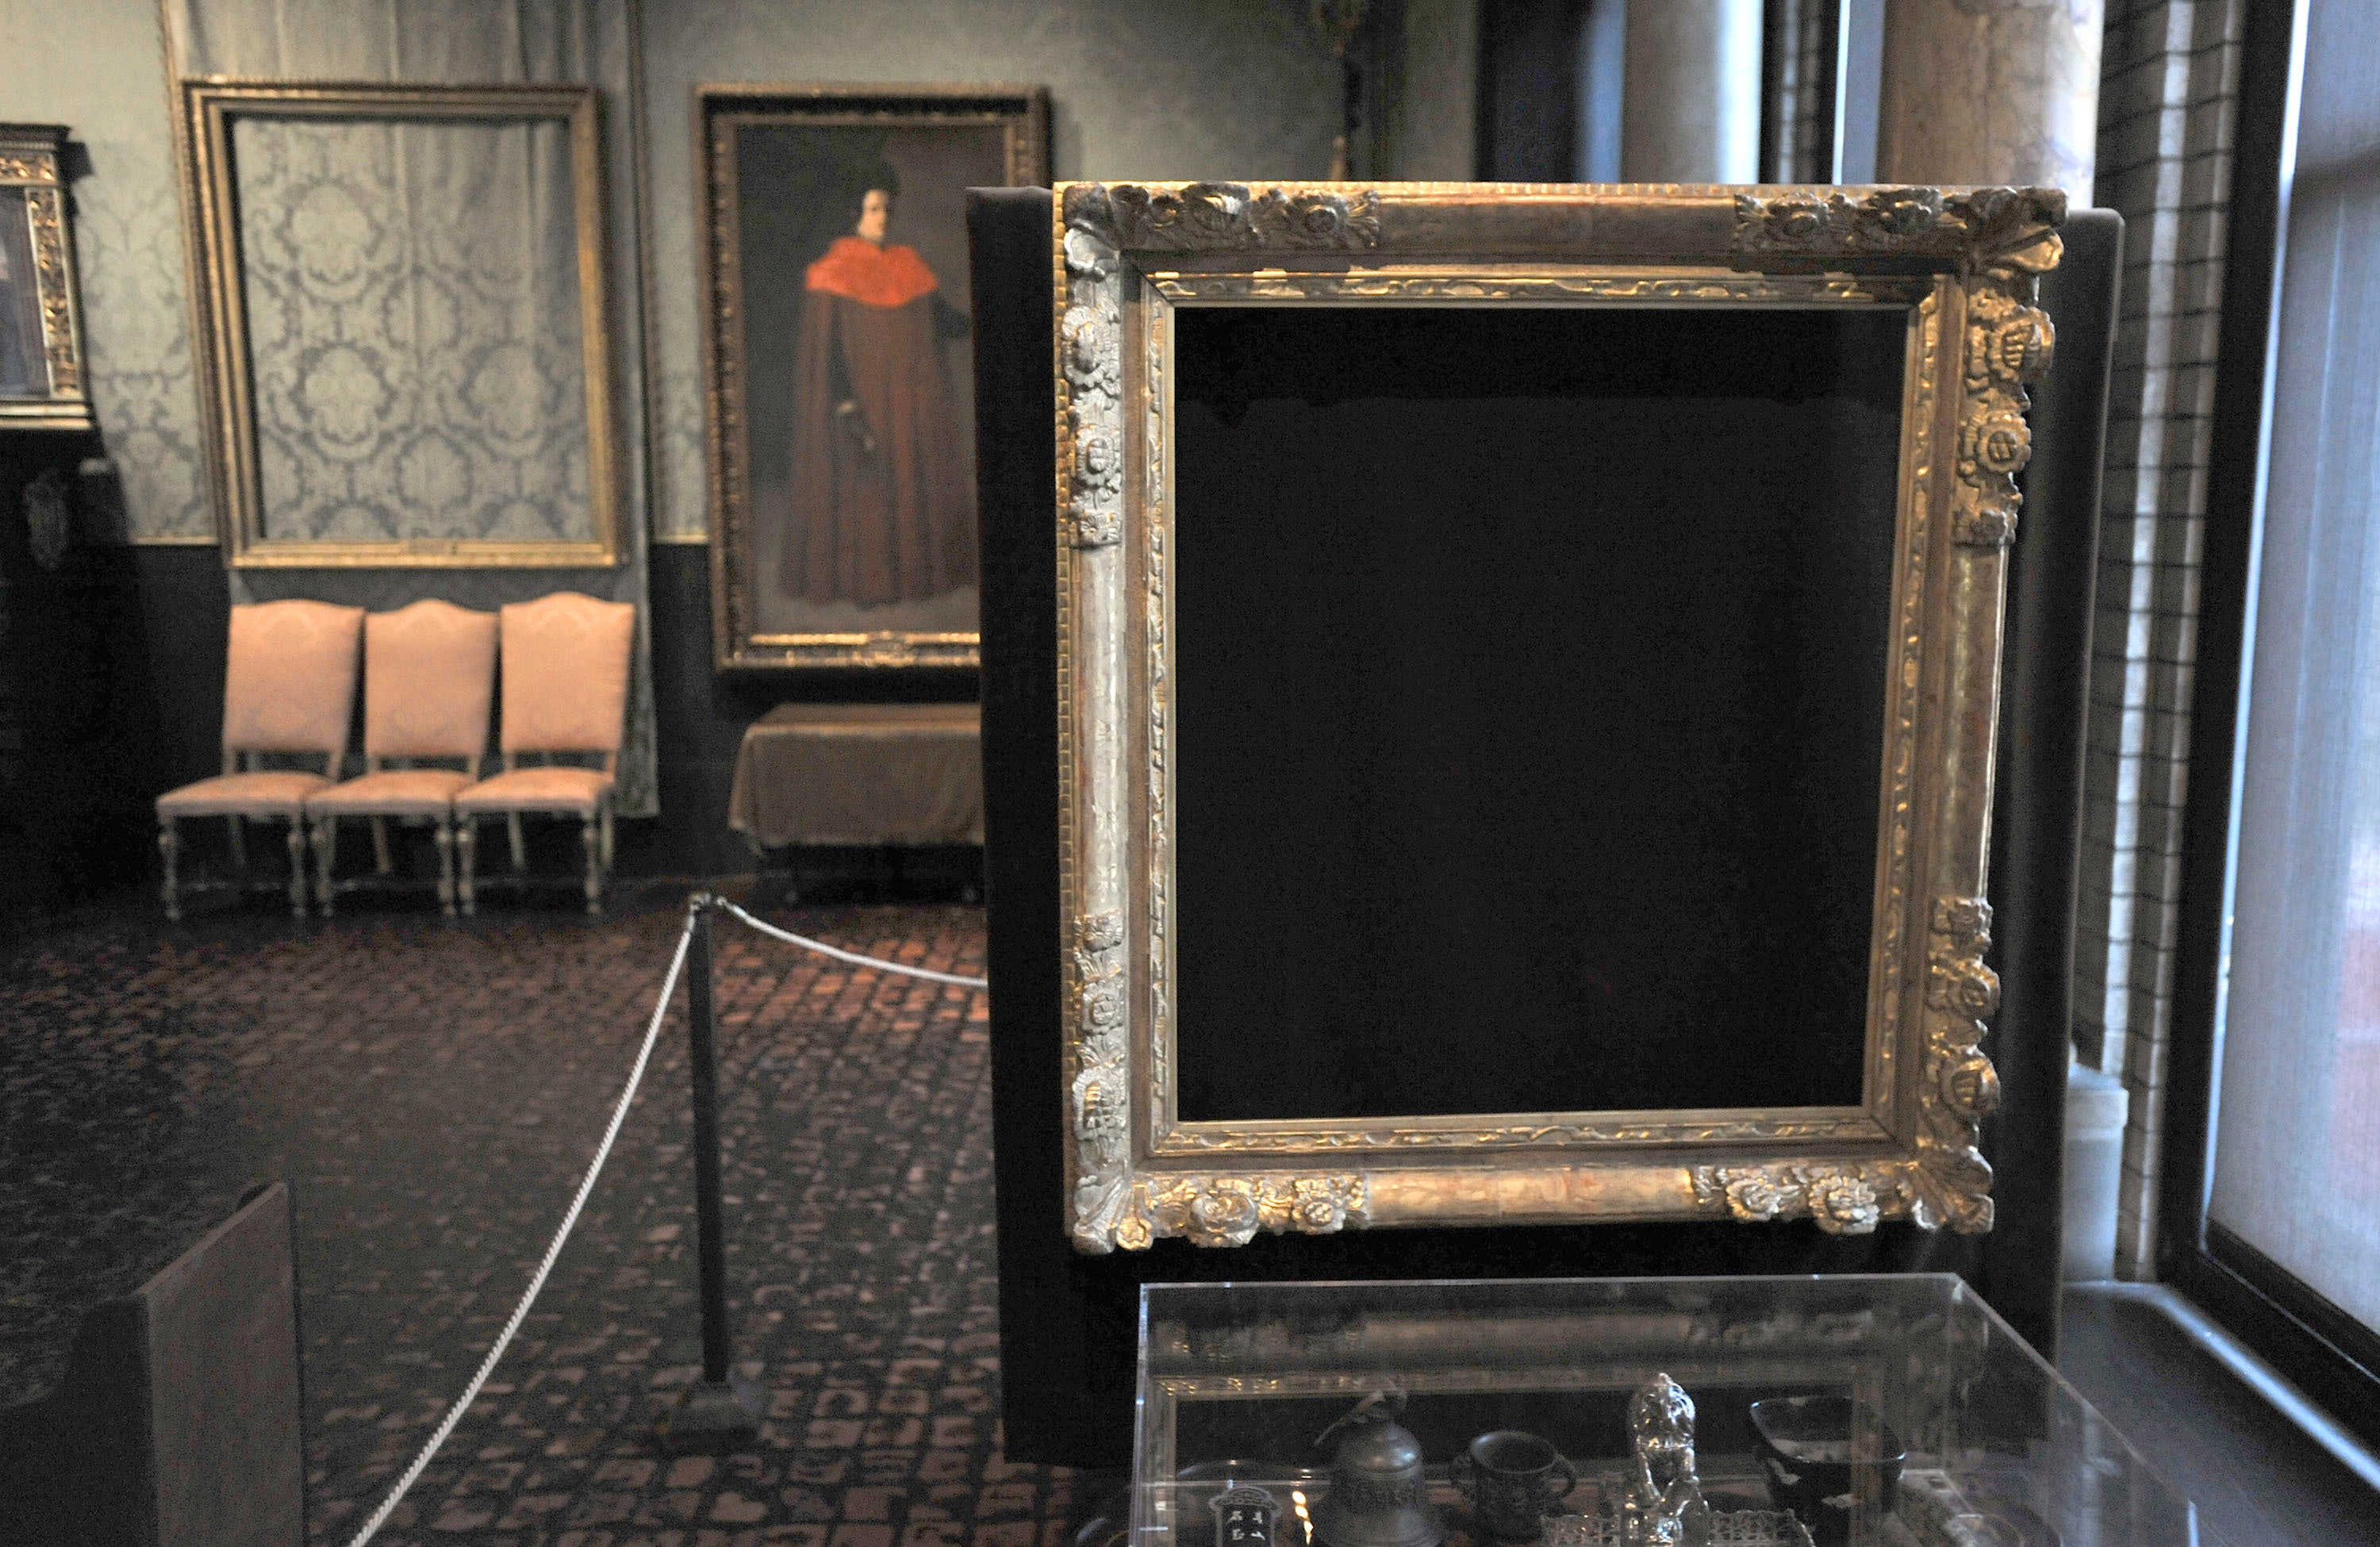 Empty frames are now displayed where the stolen paintings hung in the Boston museum